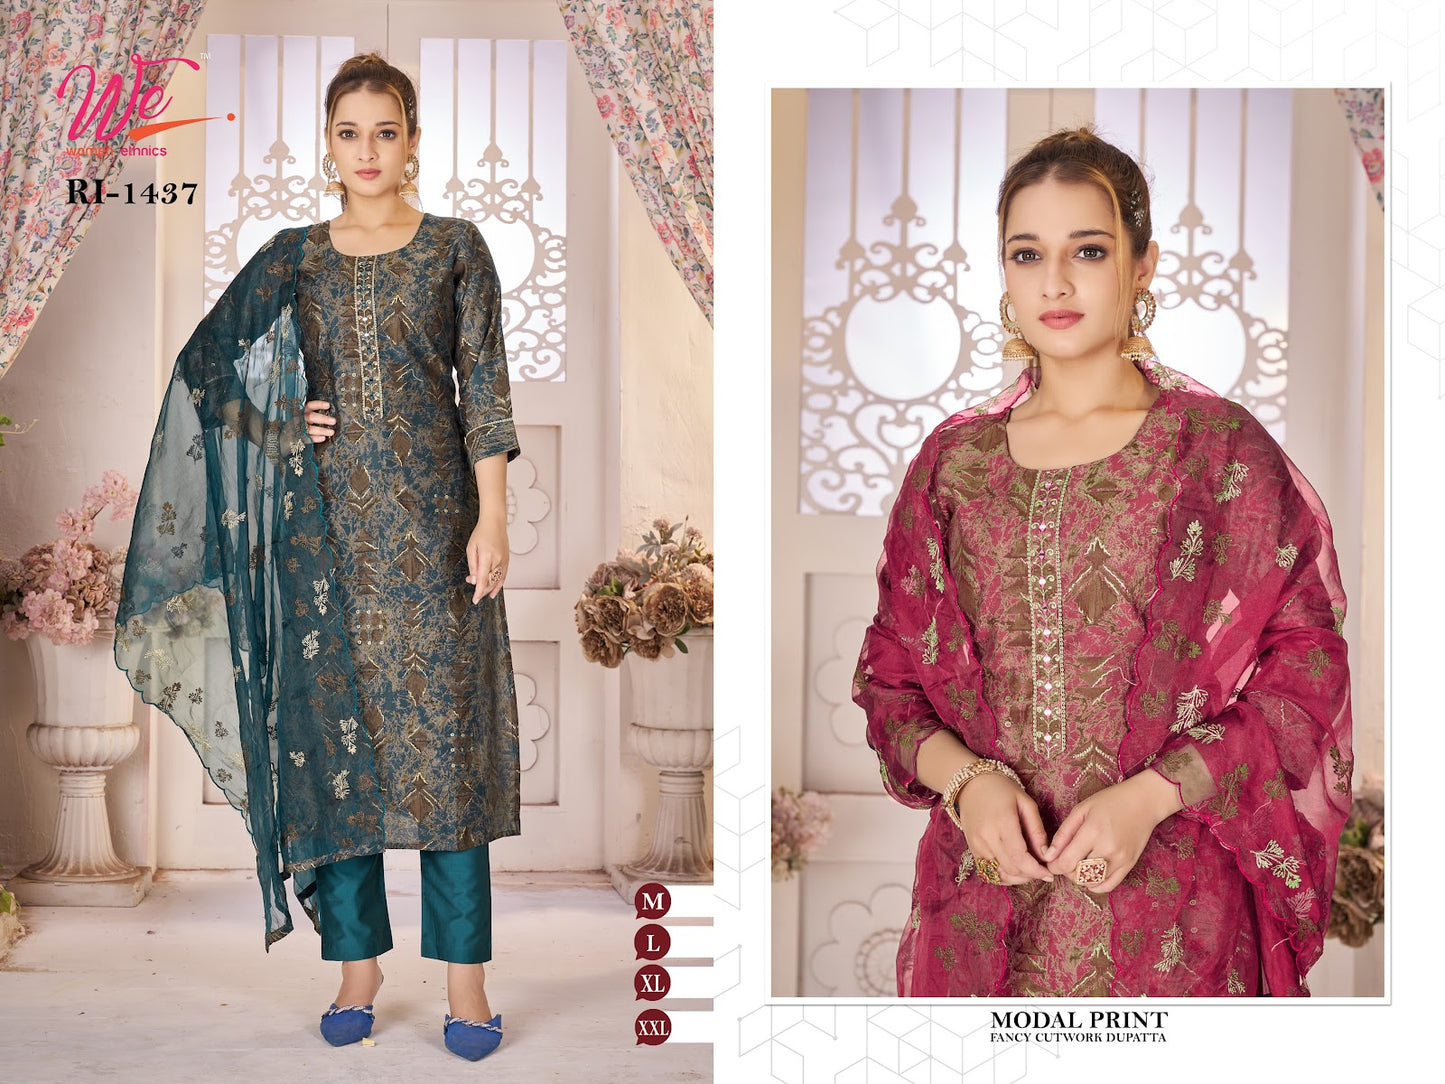 Modal Print Women Ethnics Readymade Pant Style Suits